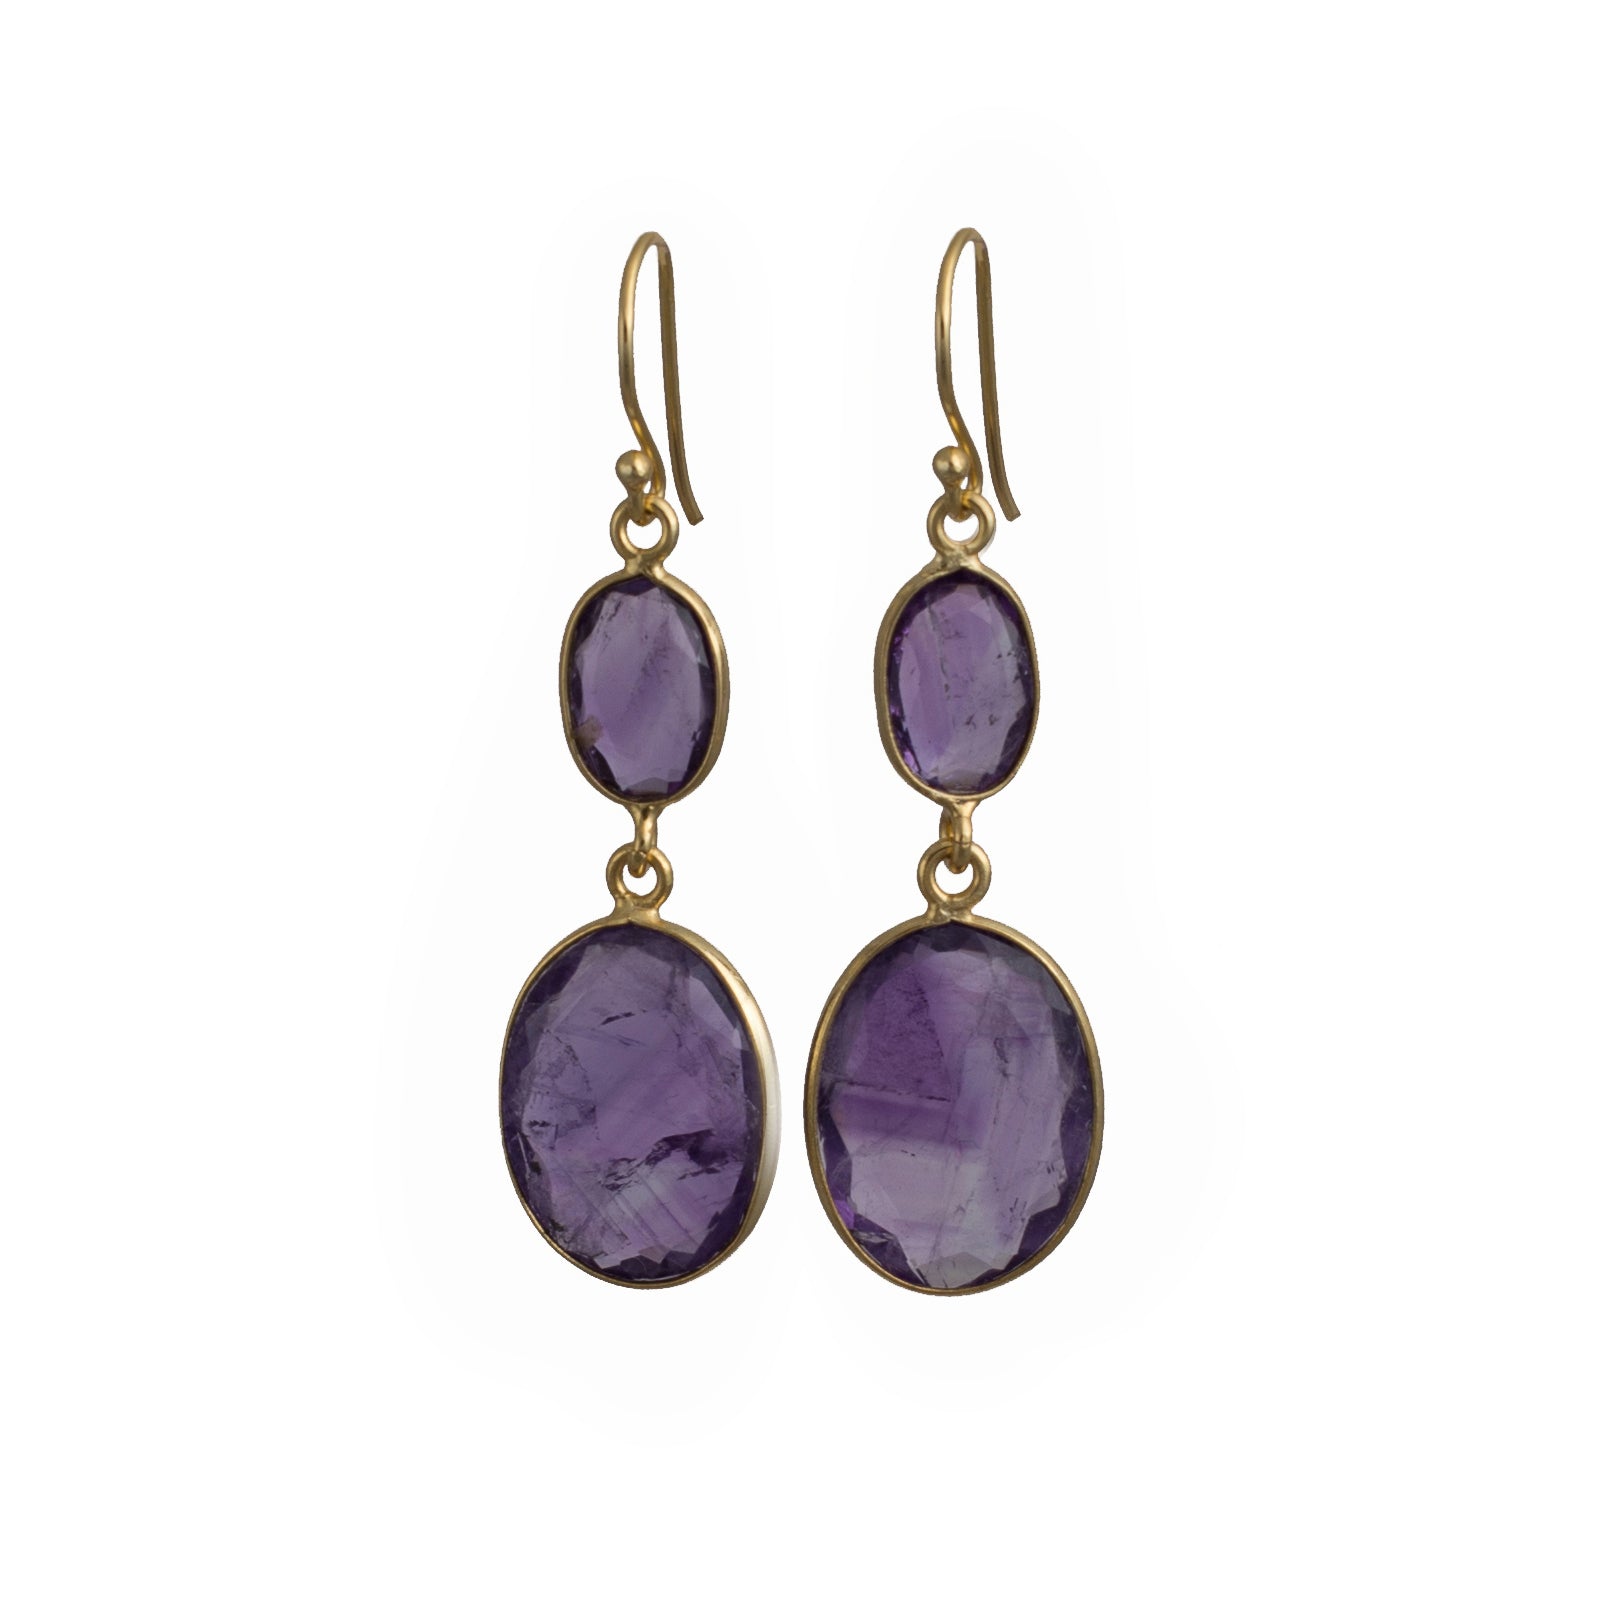 Gold Plated Sterling Silver Natural Gemstone Long Earrings - Amethyst